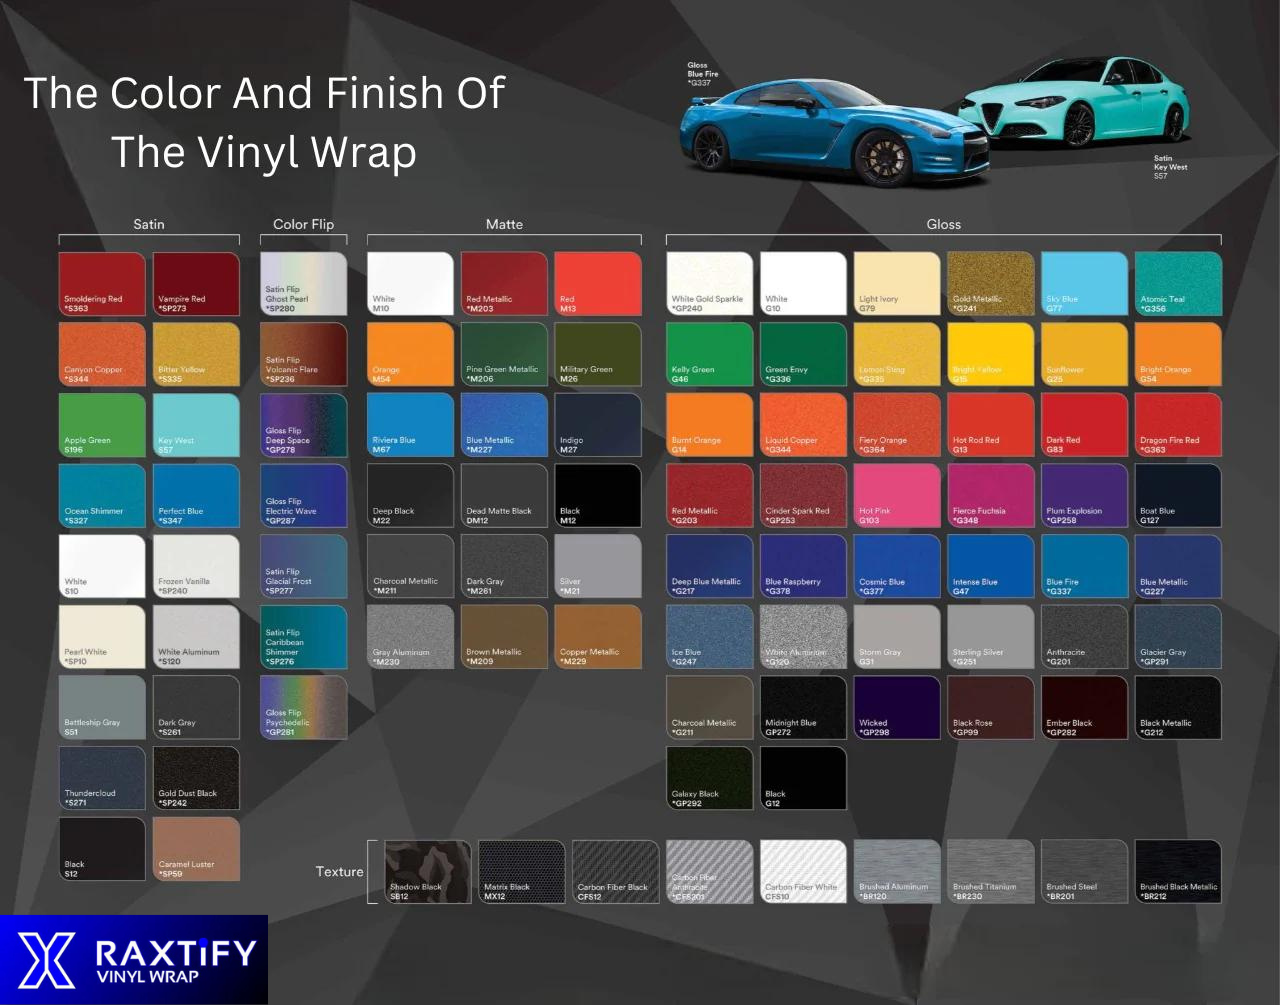 The Color And Finish Of The Vinyl Wrap